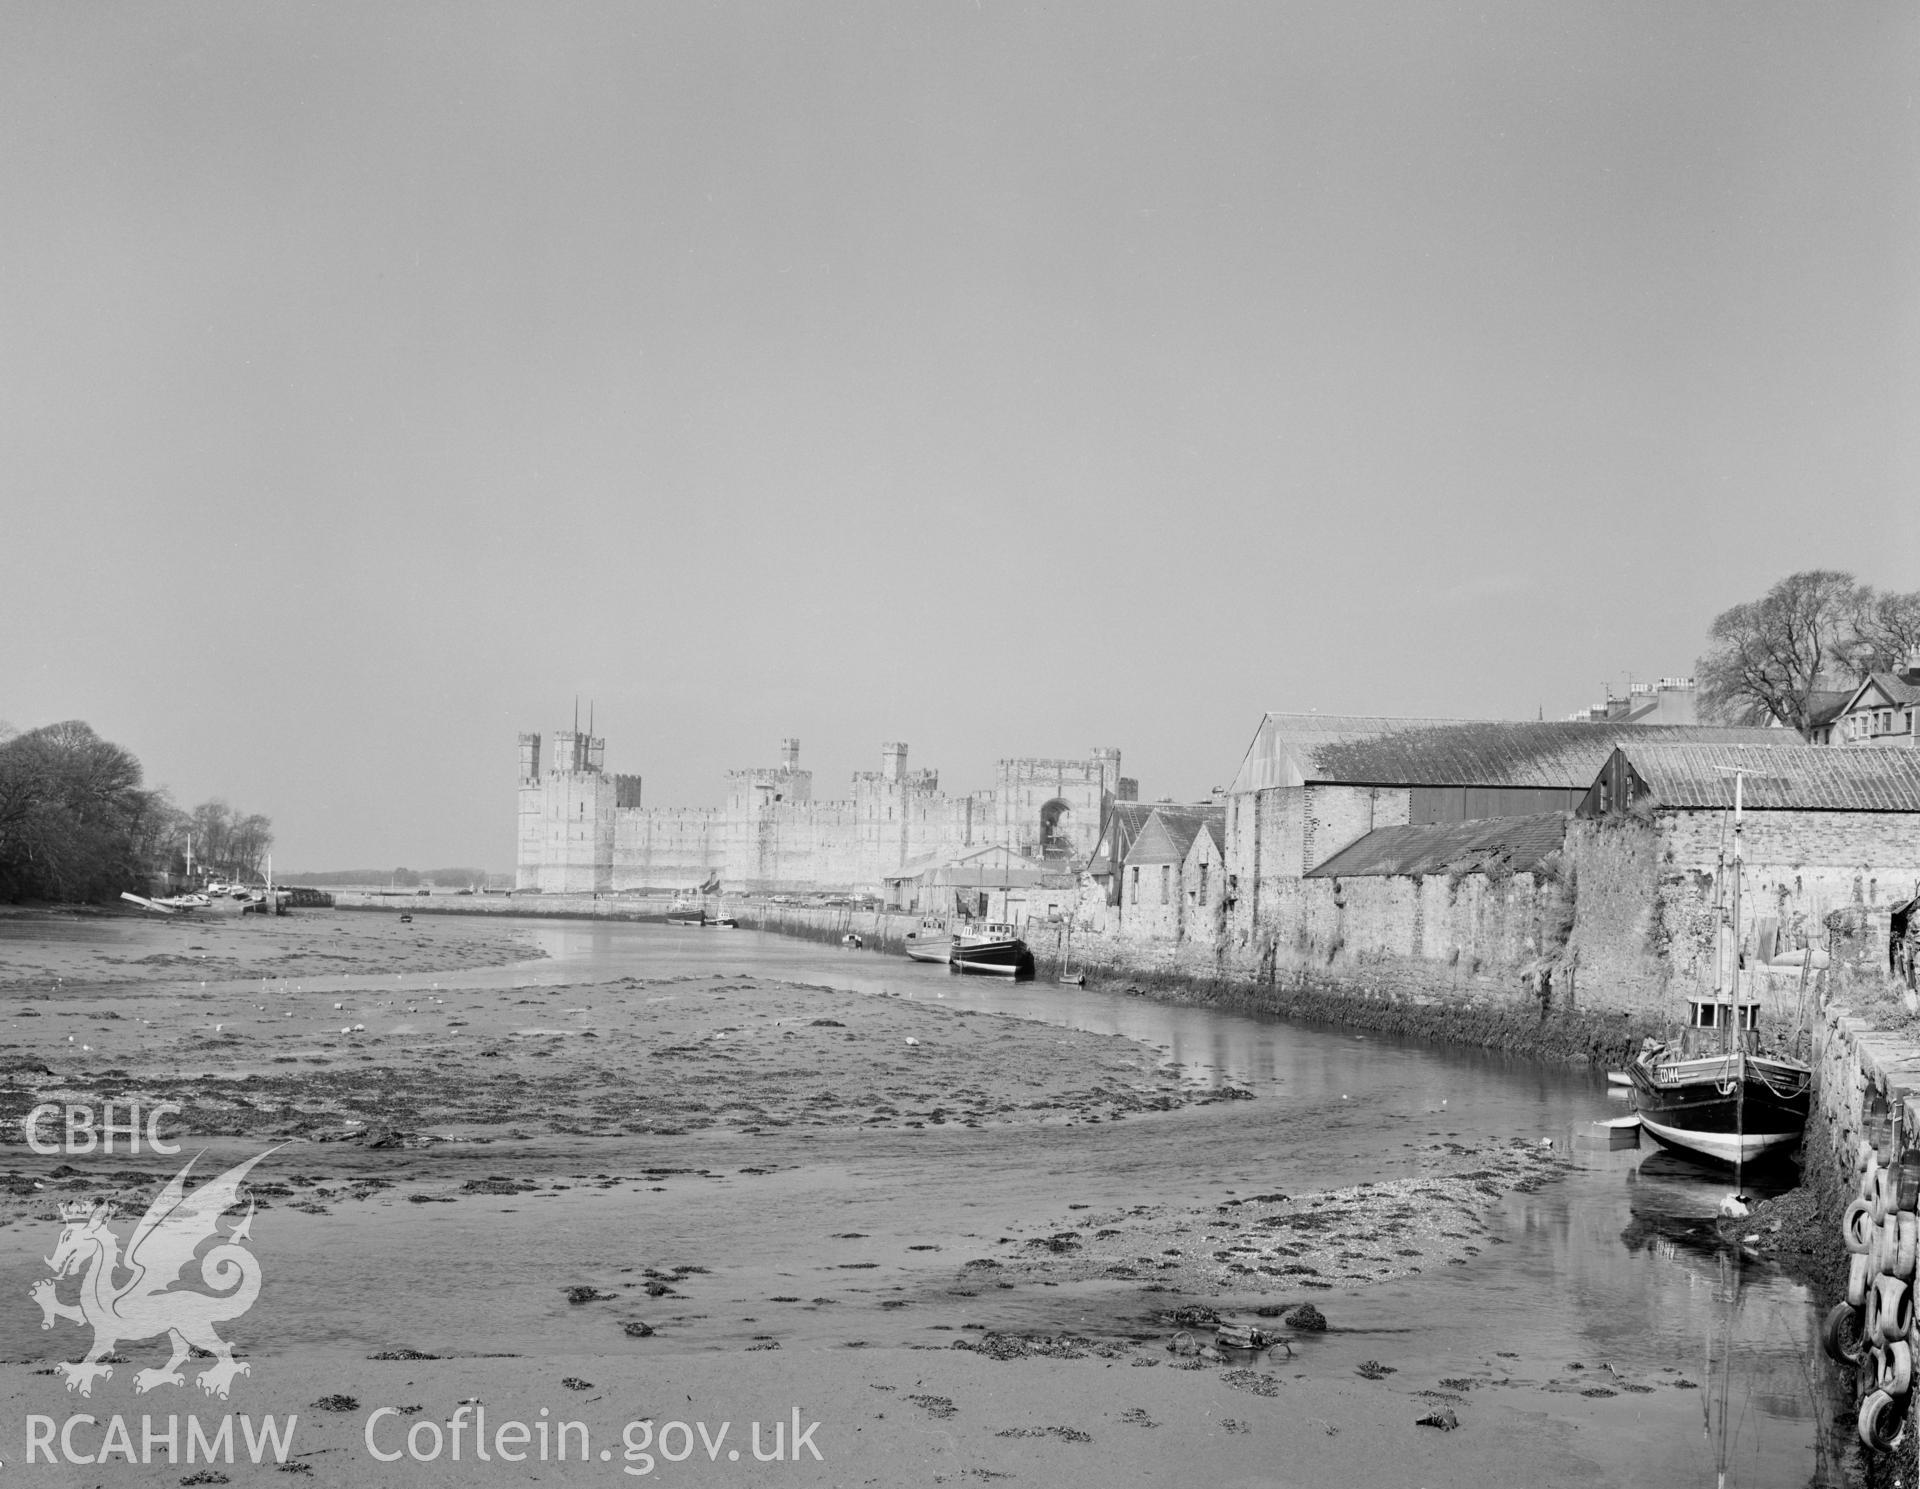 Digital copy of a black and white negative showing Caernarfon Castle, collated by the former Central Office of Information.